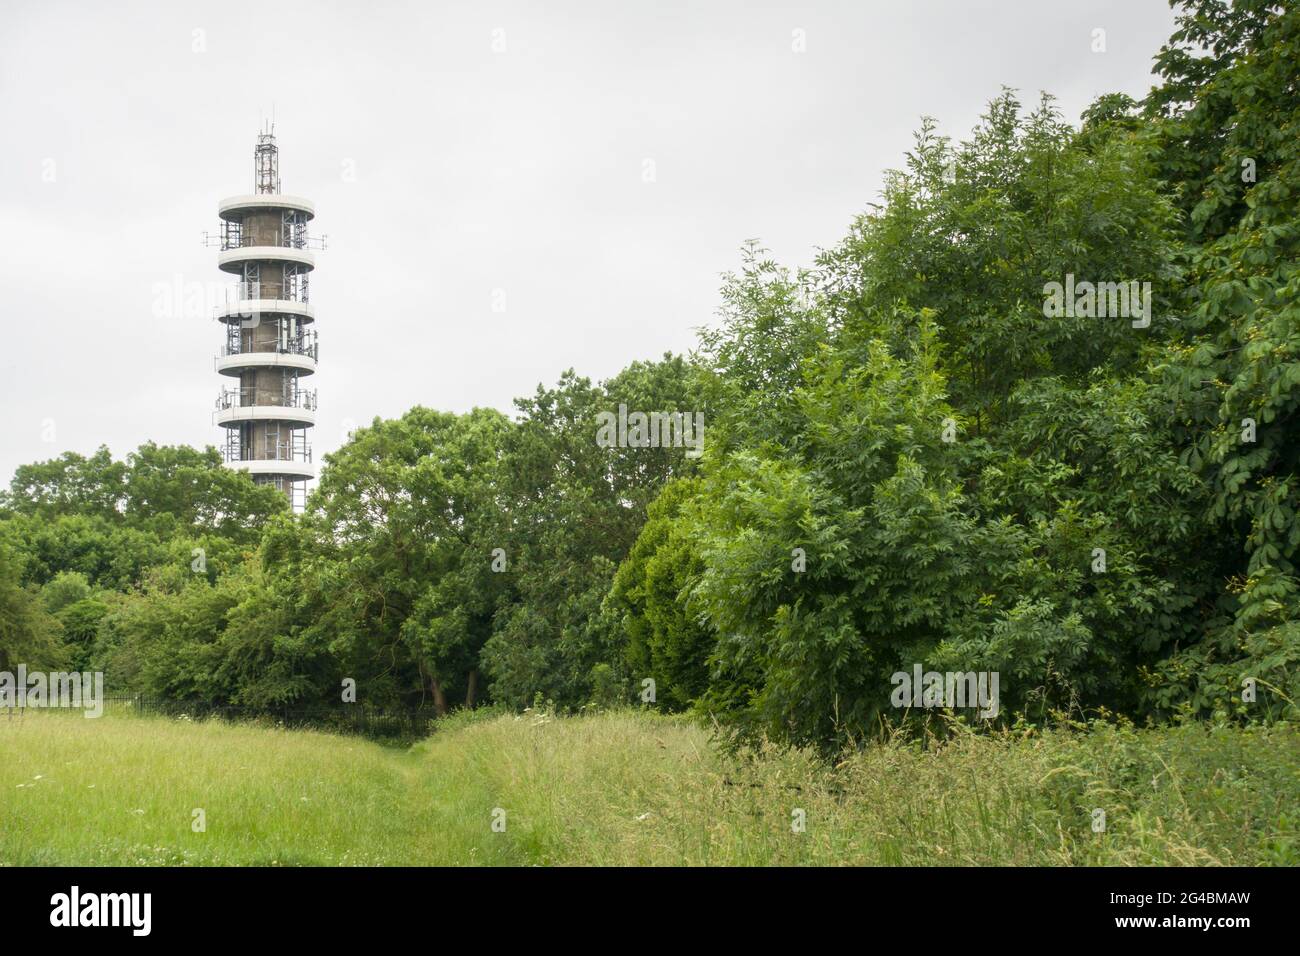 Purdown BT Tower in Stoke Park, Bristol, a reinforced concrete telecommunications tower of 1970. Stock Photo